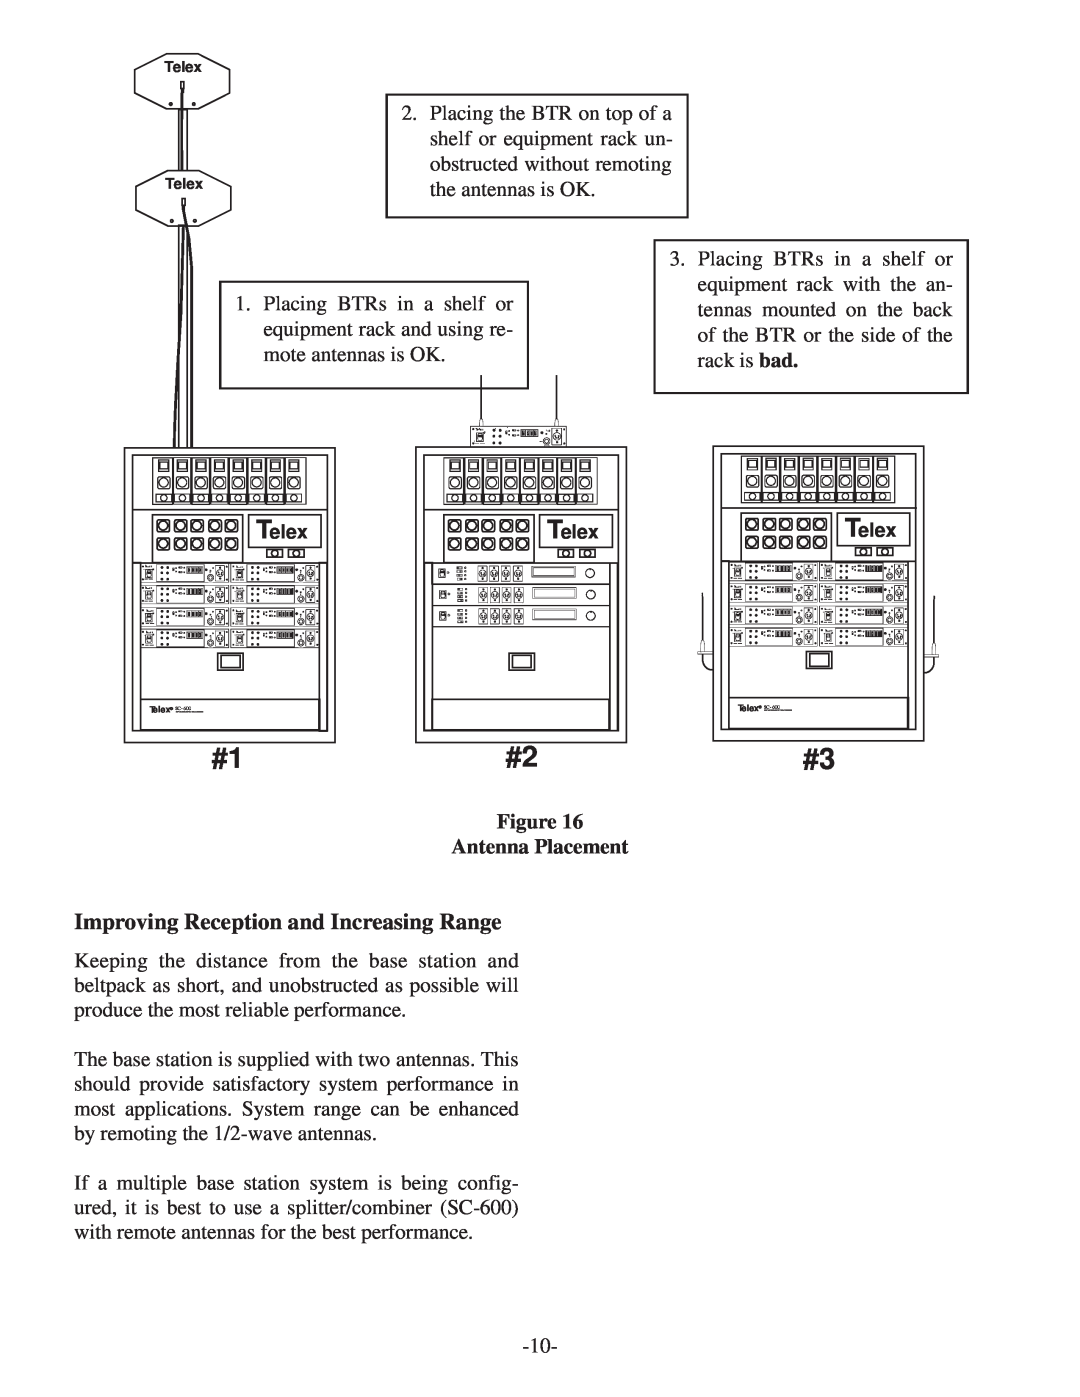 Telex BTR-500/600C operating instructions #1#2, Improving Reception and Increasing Range, Figure Antenna Placement 